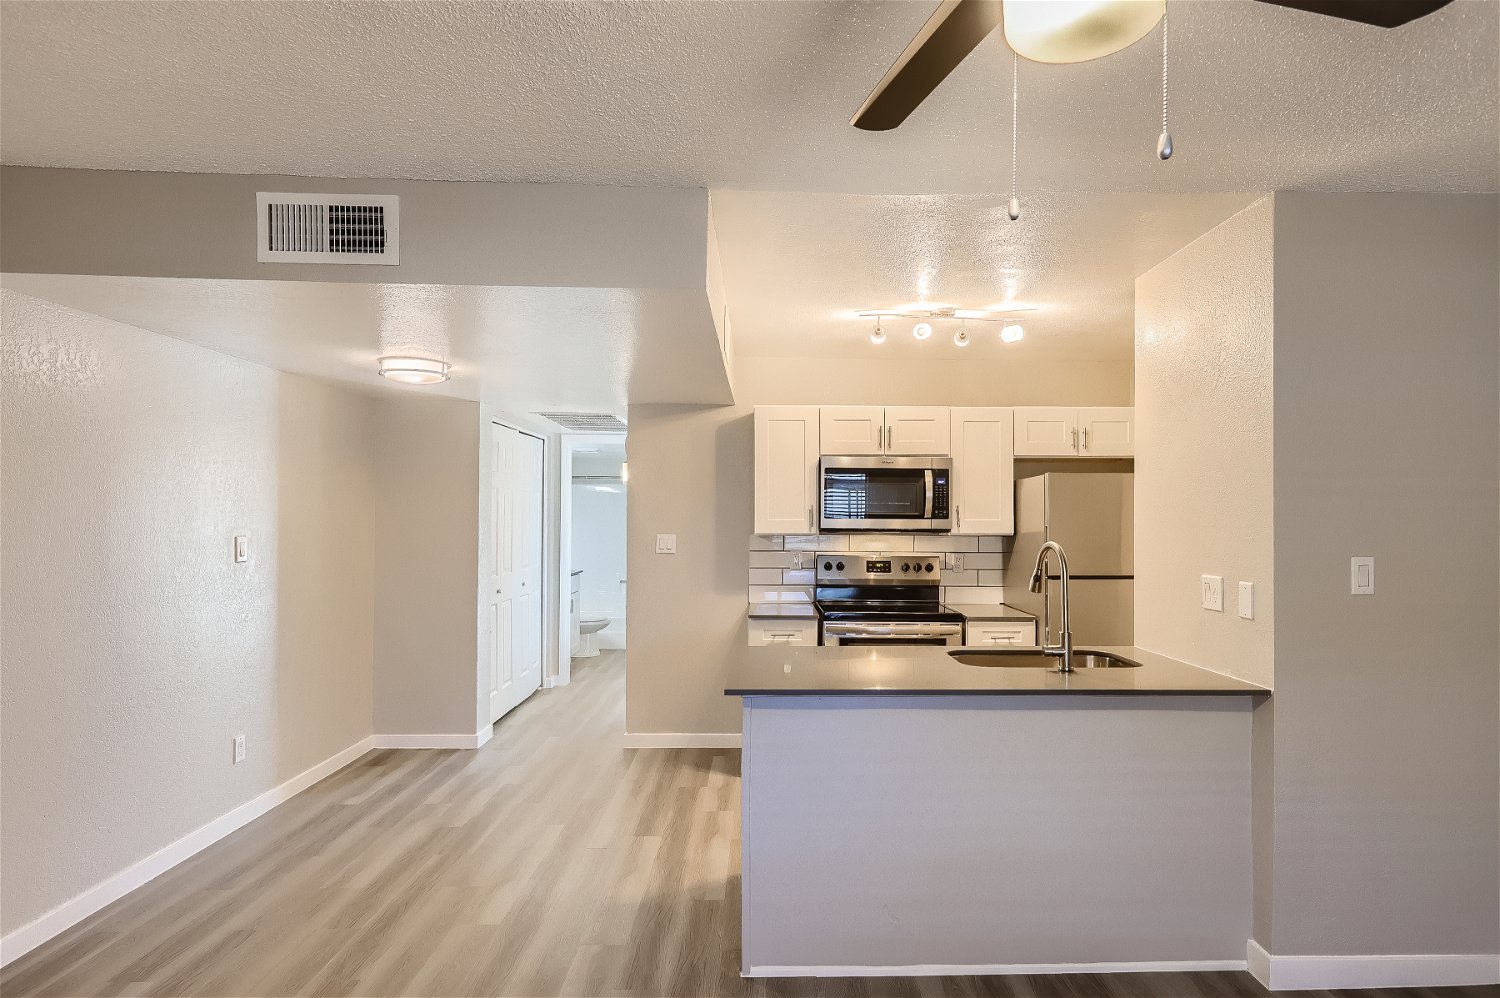 The remodeled kitchen with quartz countertops, wood-style flooring and a hallway to the bathroom at 